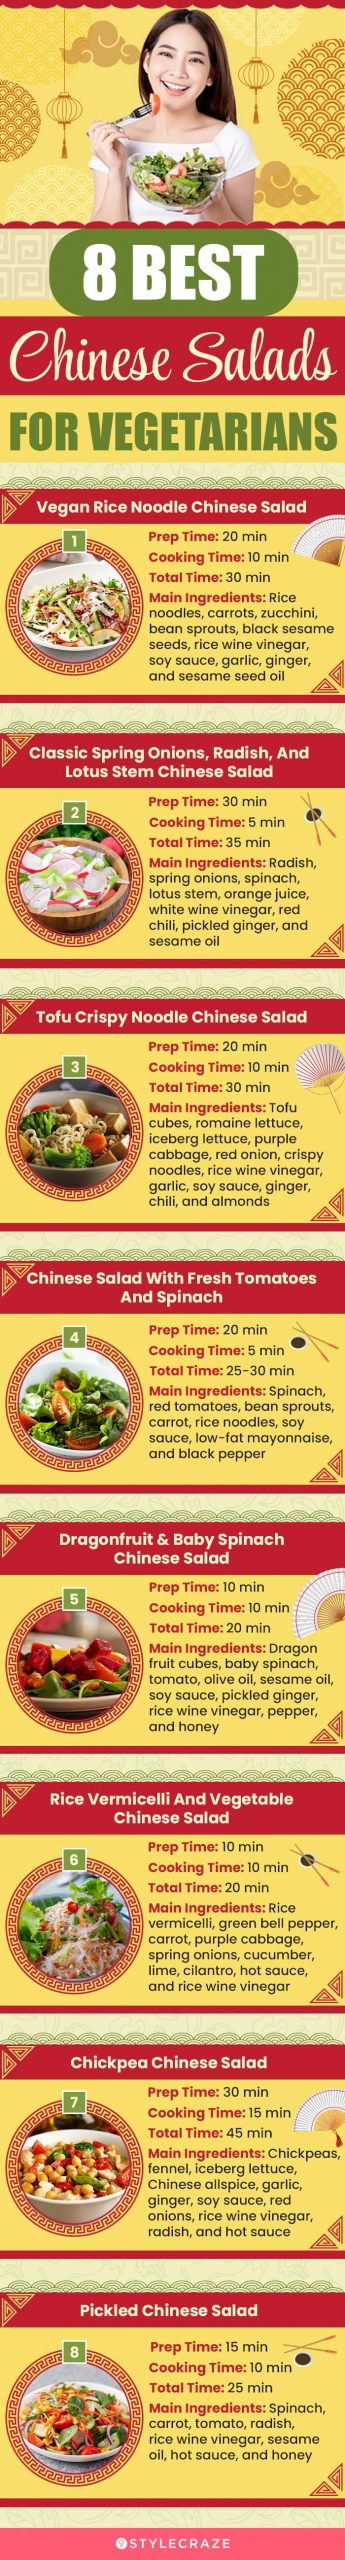 8 best chinese salads for vegetarians [infographic]